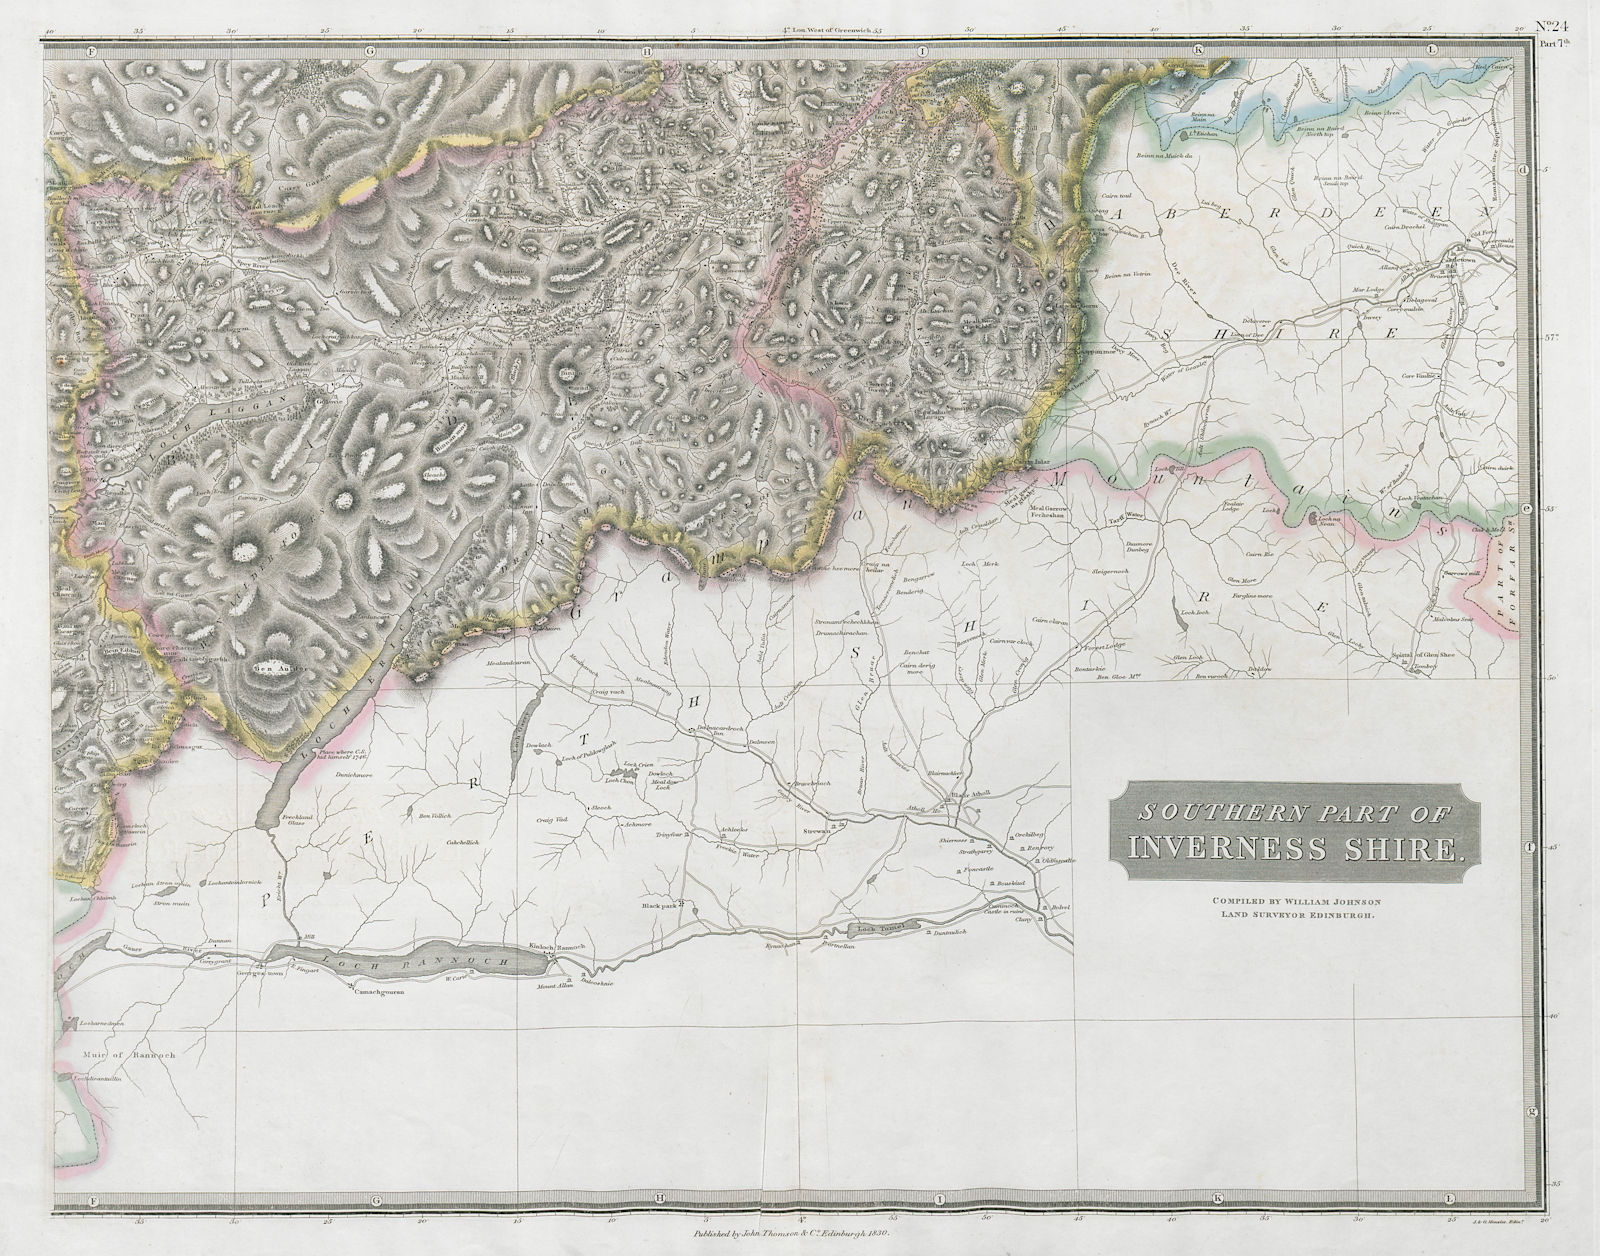 Inverness-shire south-east sheet. Ericht Cairngorms Kingussie. THOMSON 1832 map